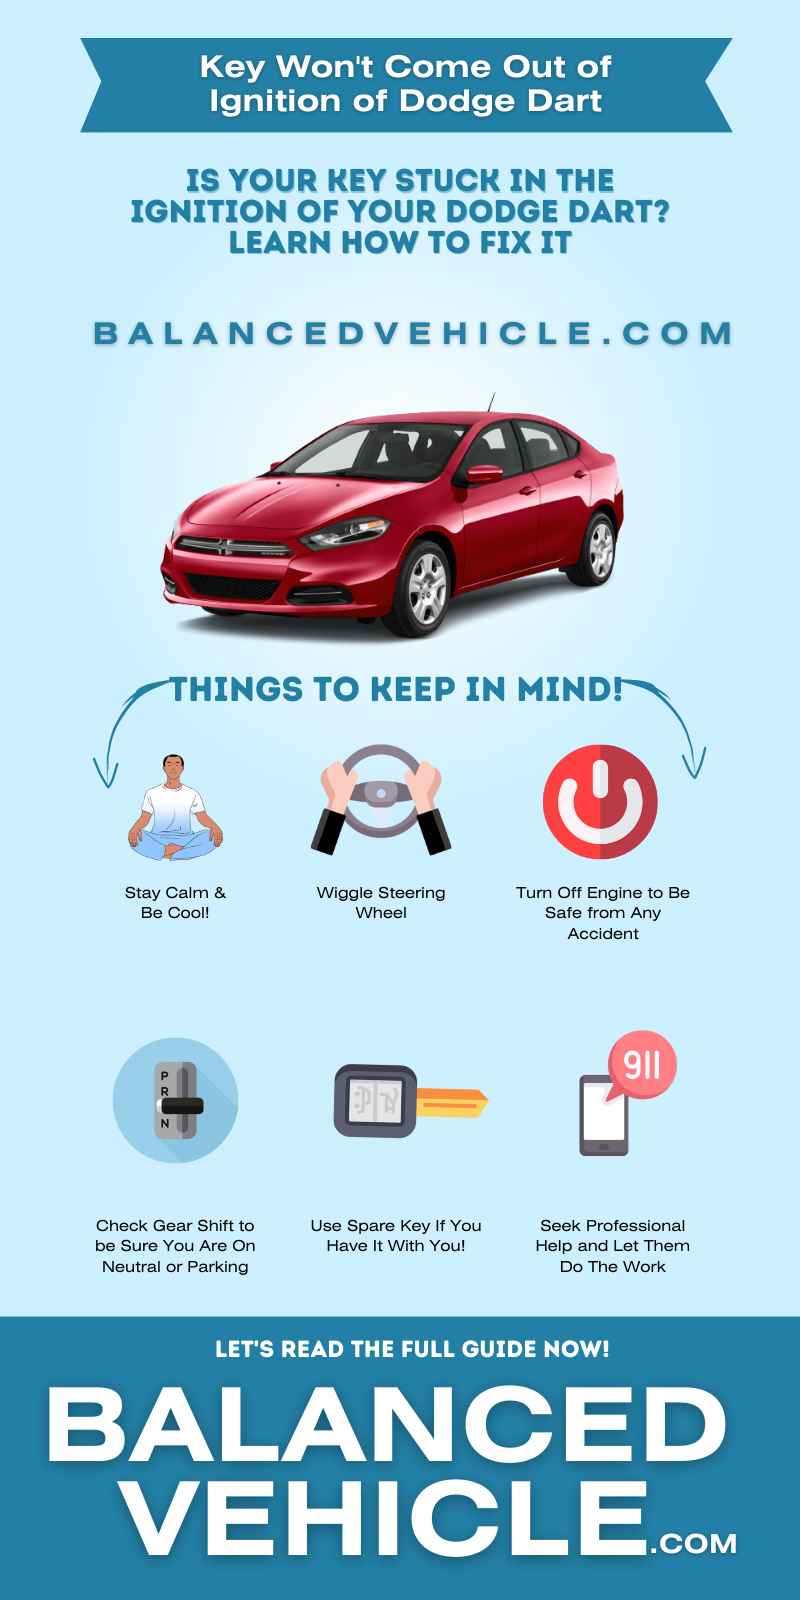 Key Won’t Come Out of Ignition of Dodge Dart - Infographic